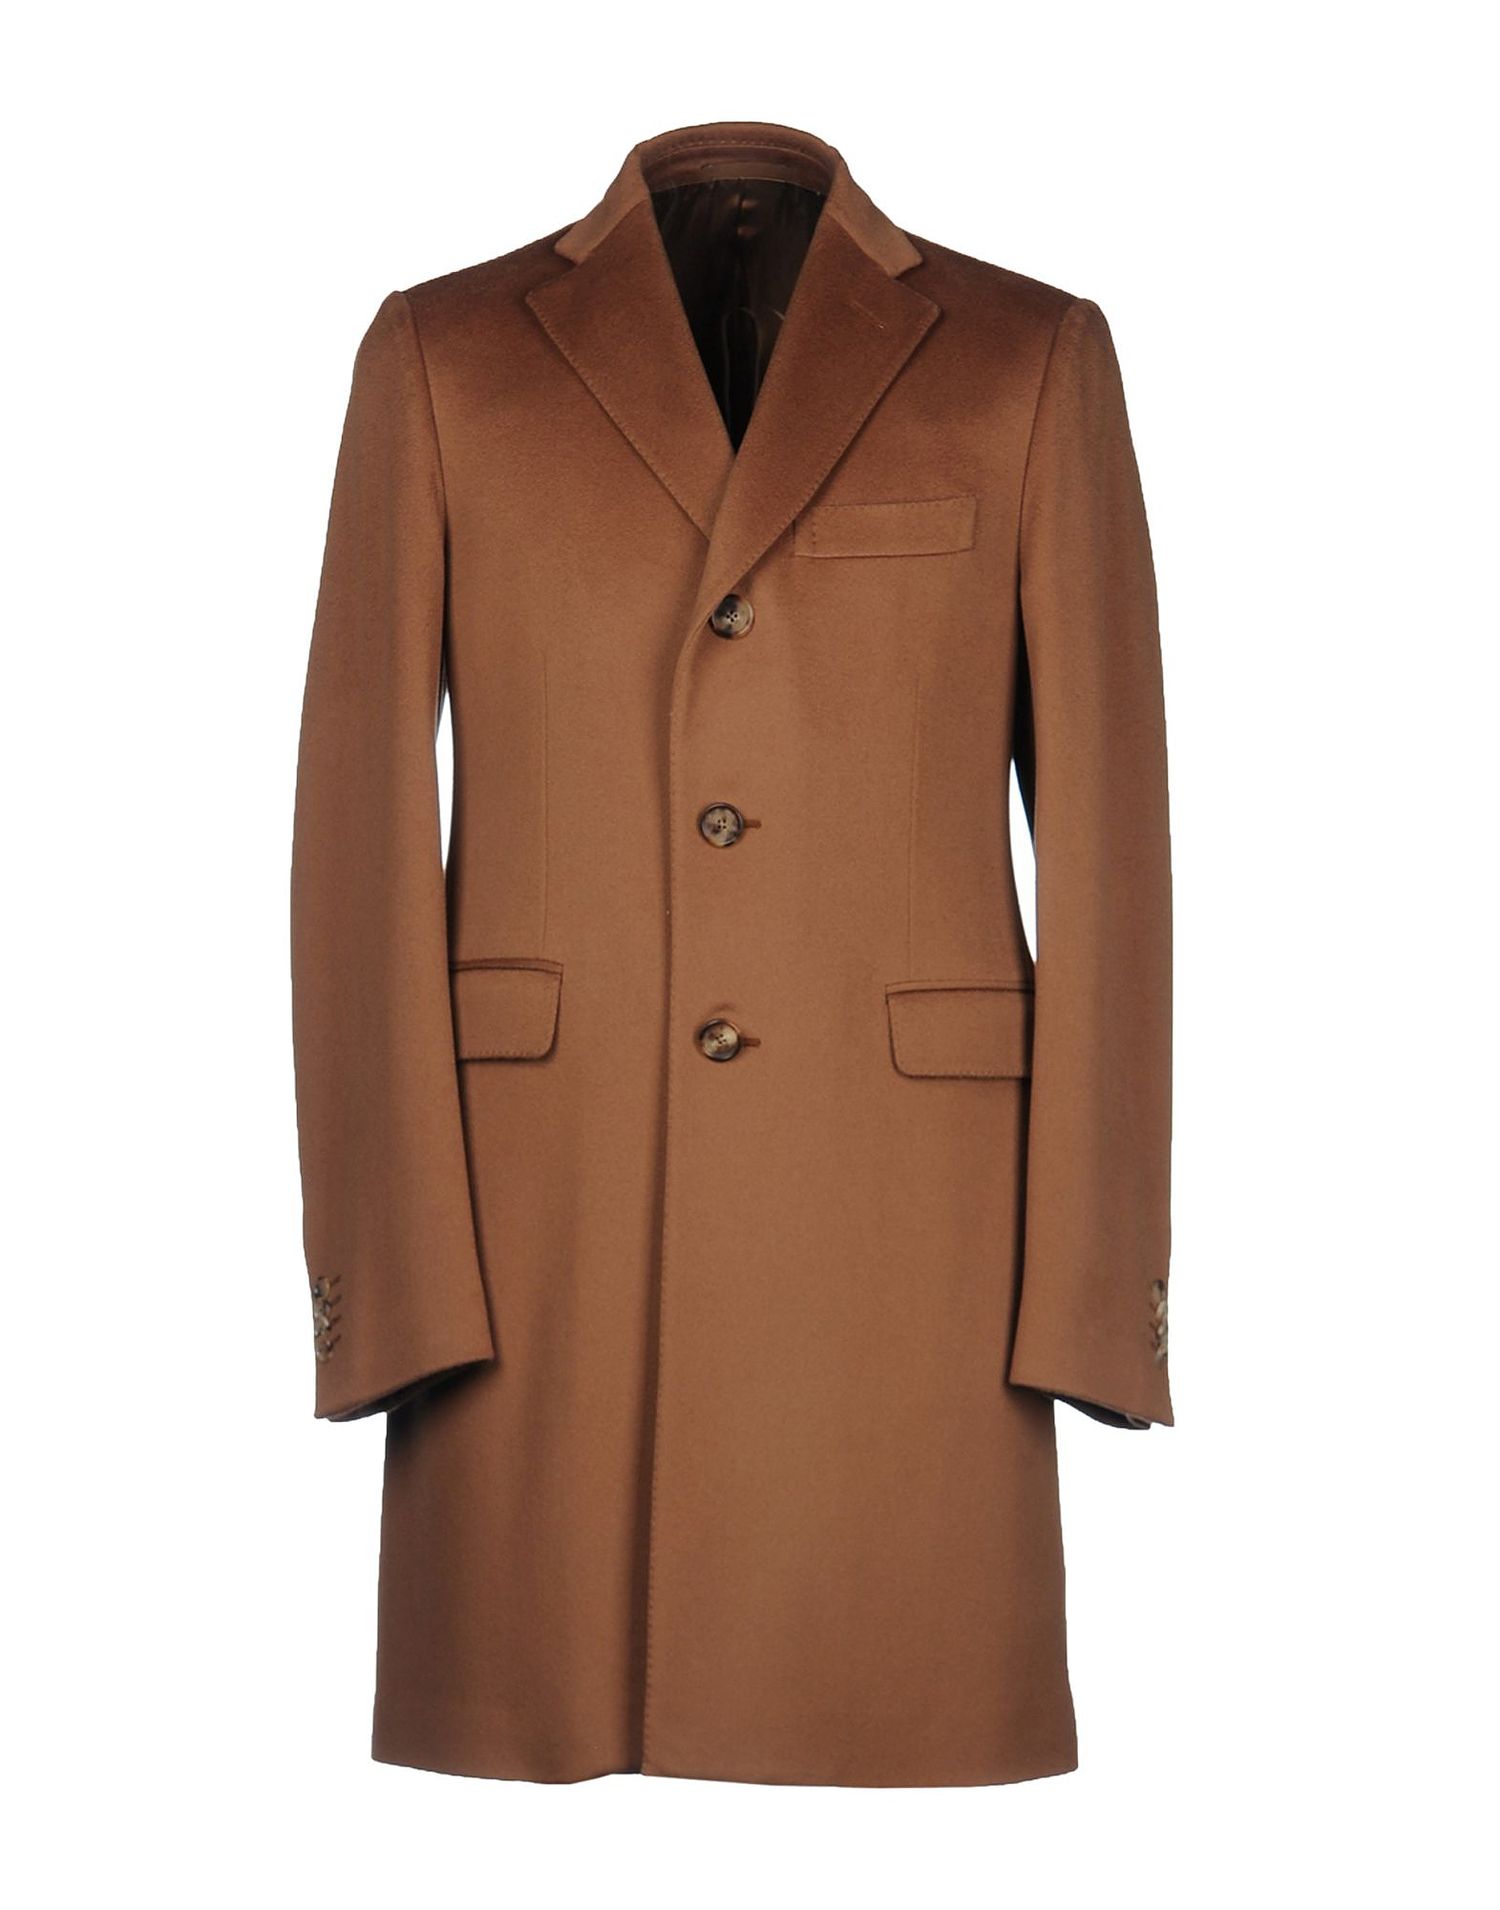 Quality Overcoats - Top Men's Outerwear 